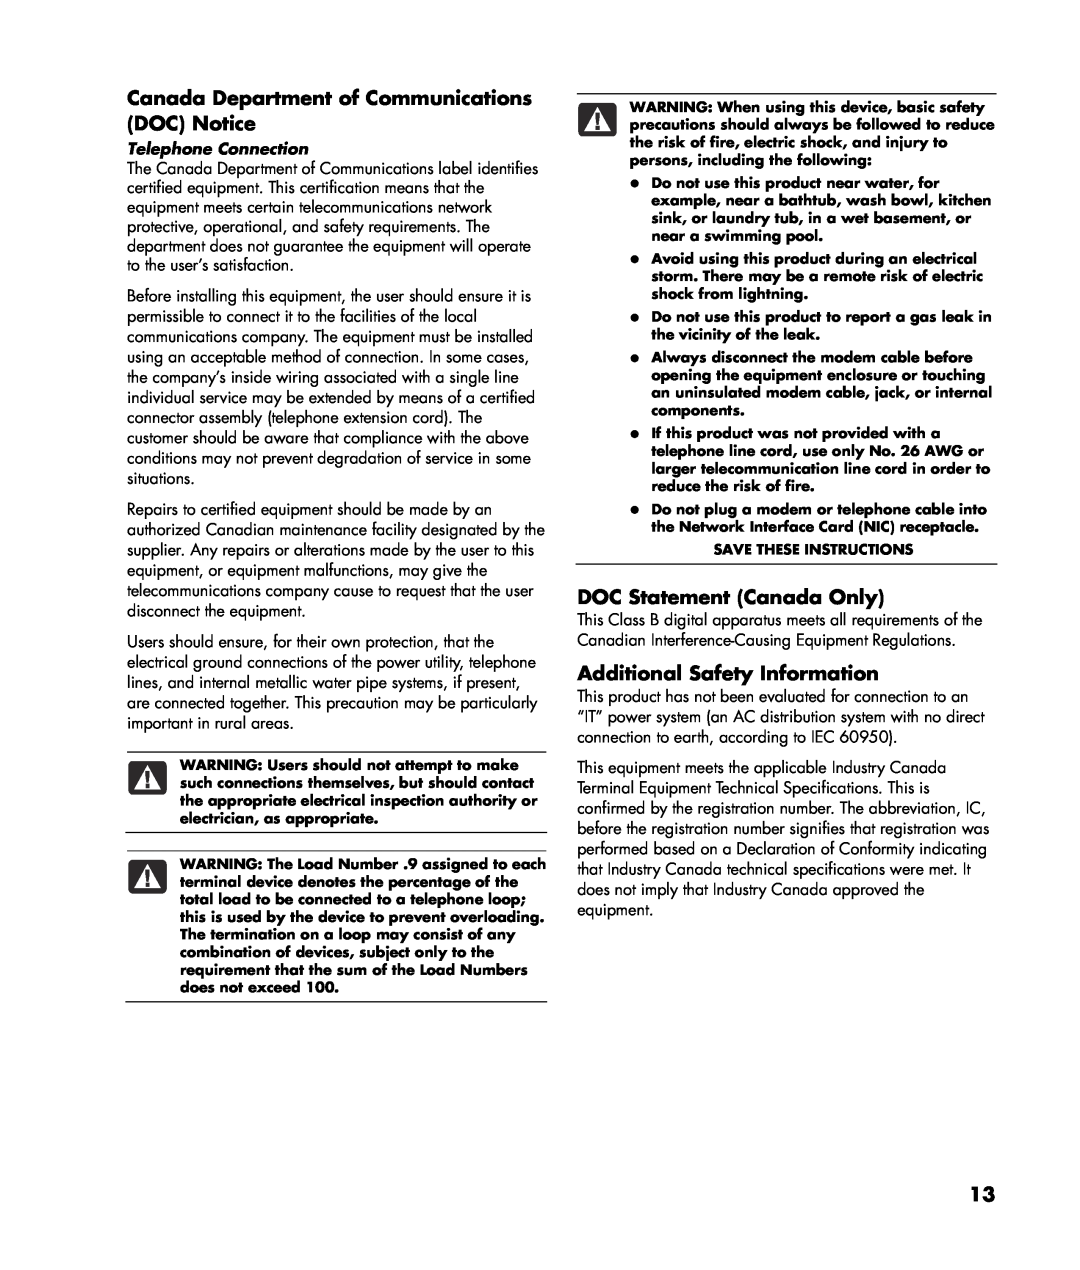 HP SR5448F manual Canada Department of Communications DOC Notice, DOC Statement Canada Only, Additional Safety Information 